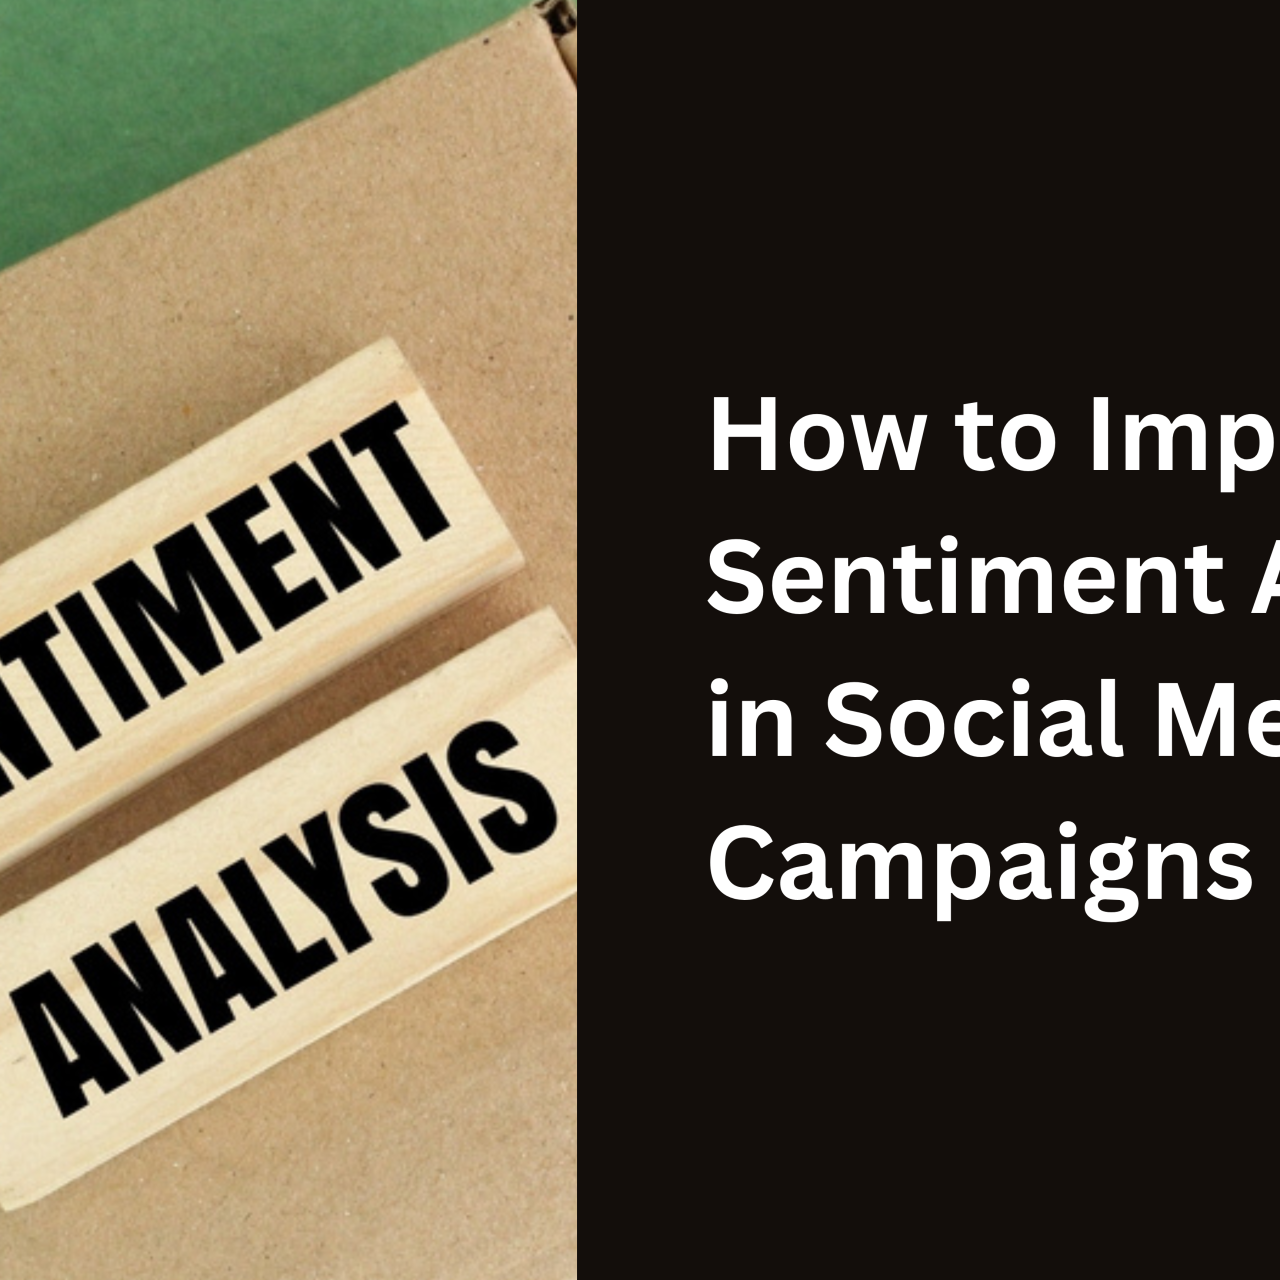 How to Implement Sentiment Analysis in Social Media Campaigns Effectively